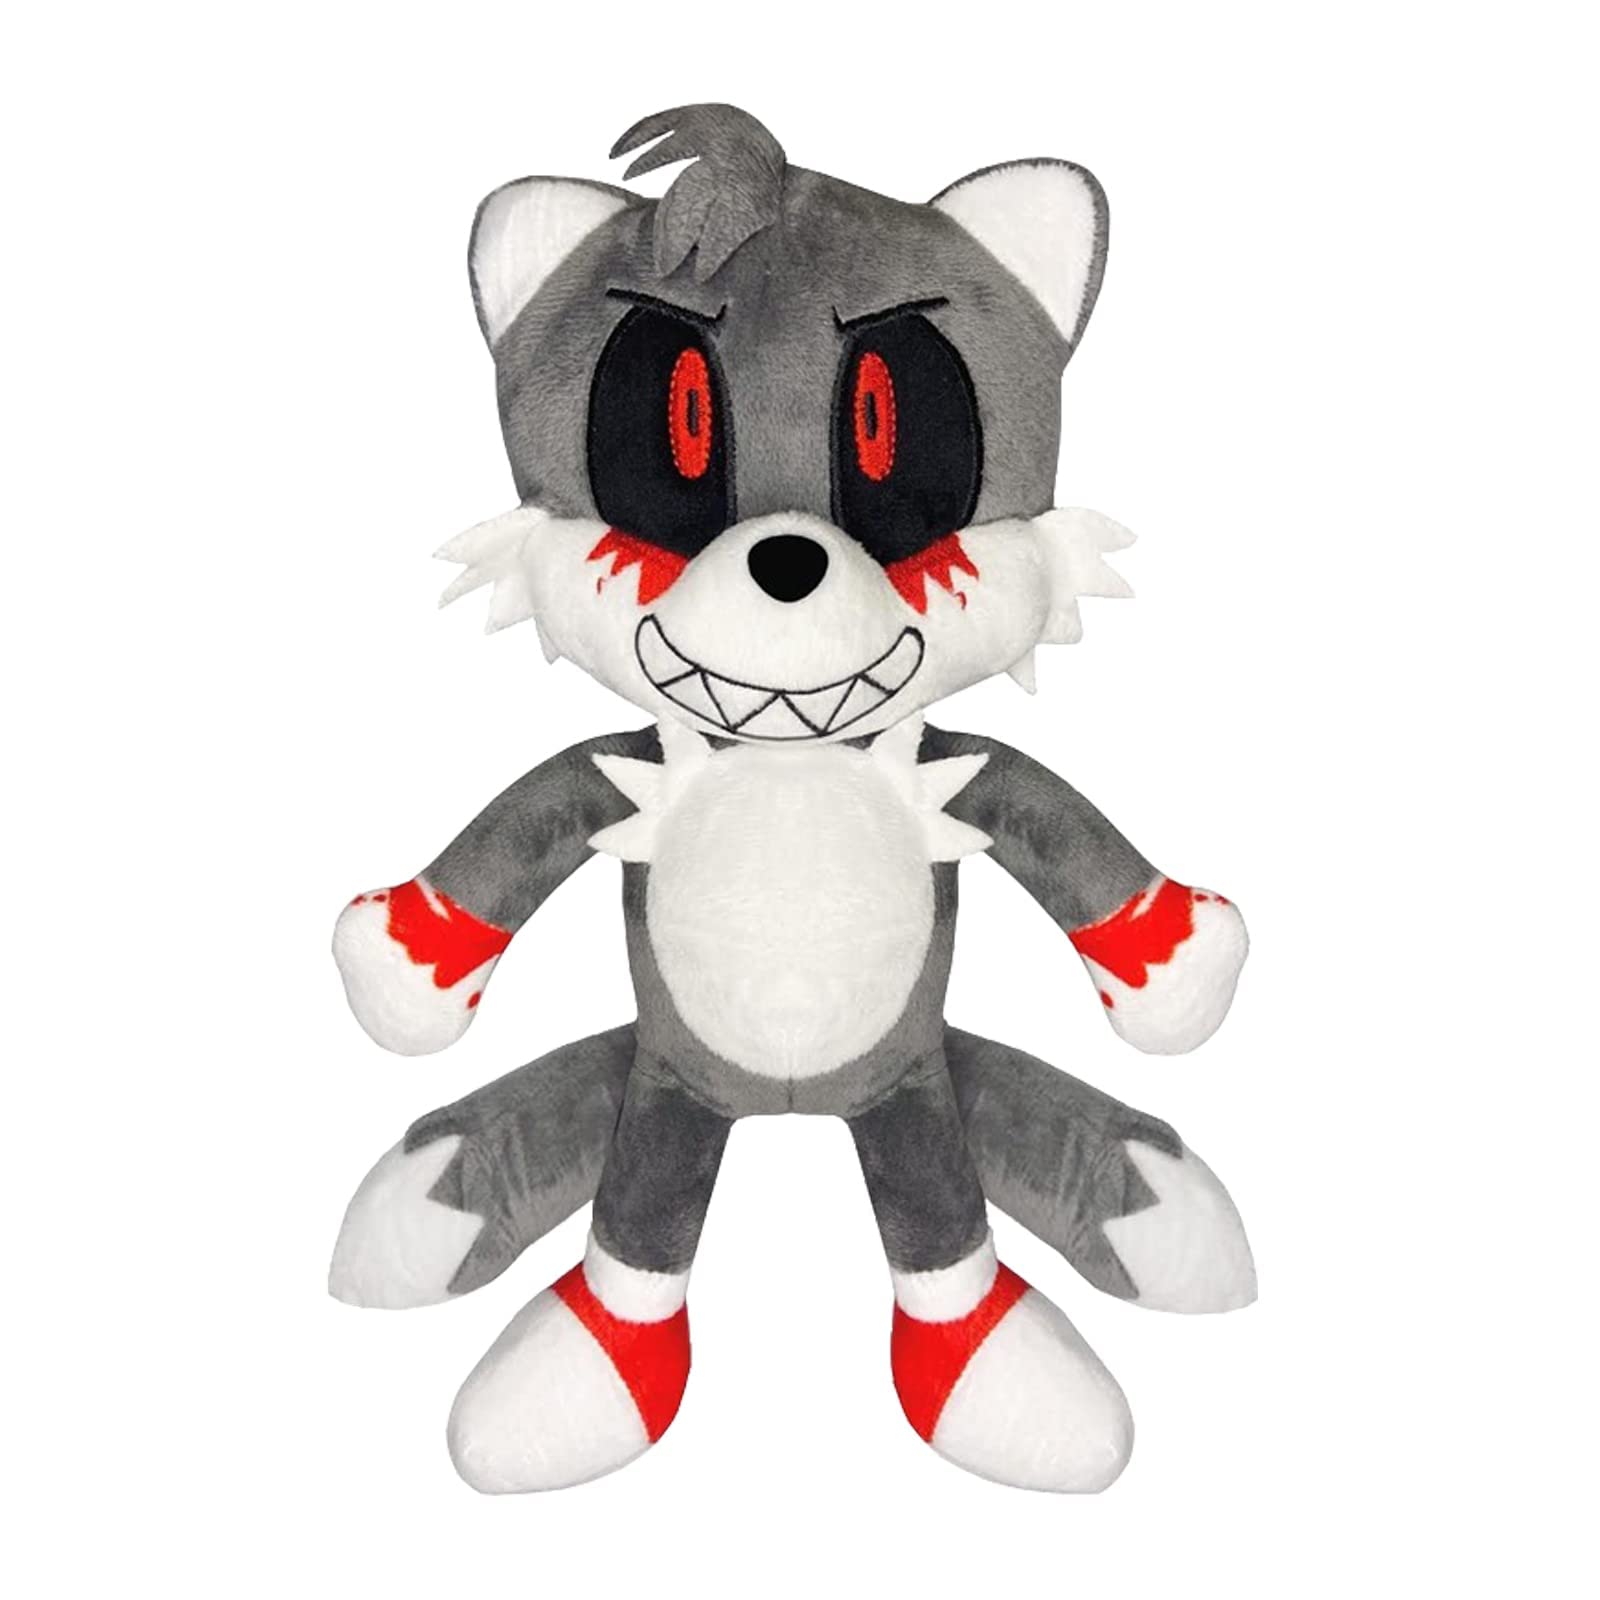 Tails Exe plush toy alternative options and updates.